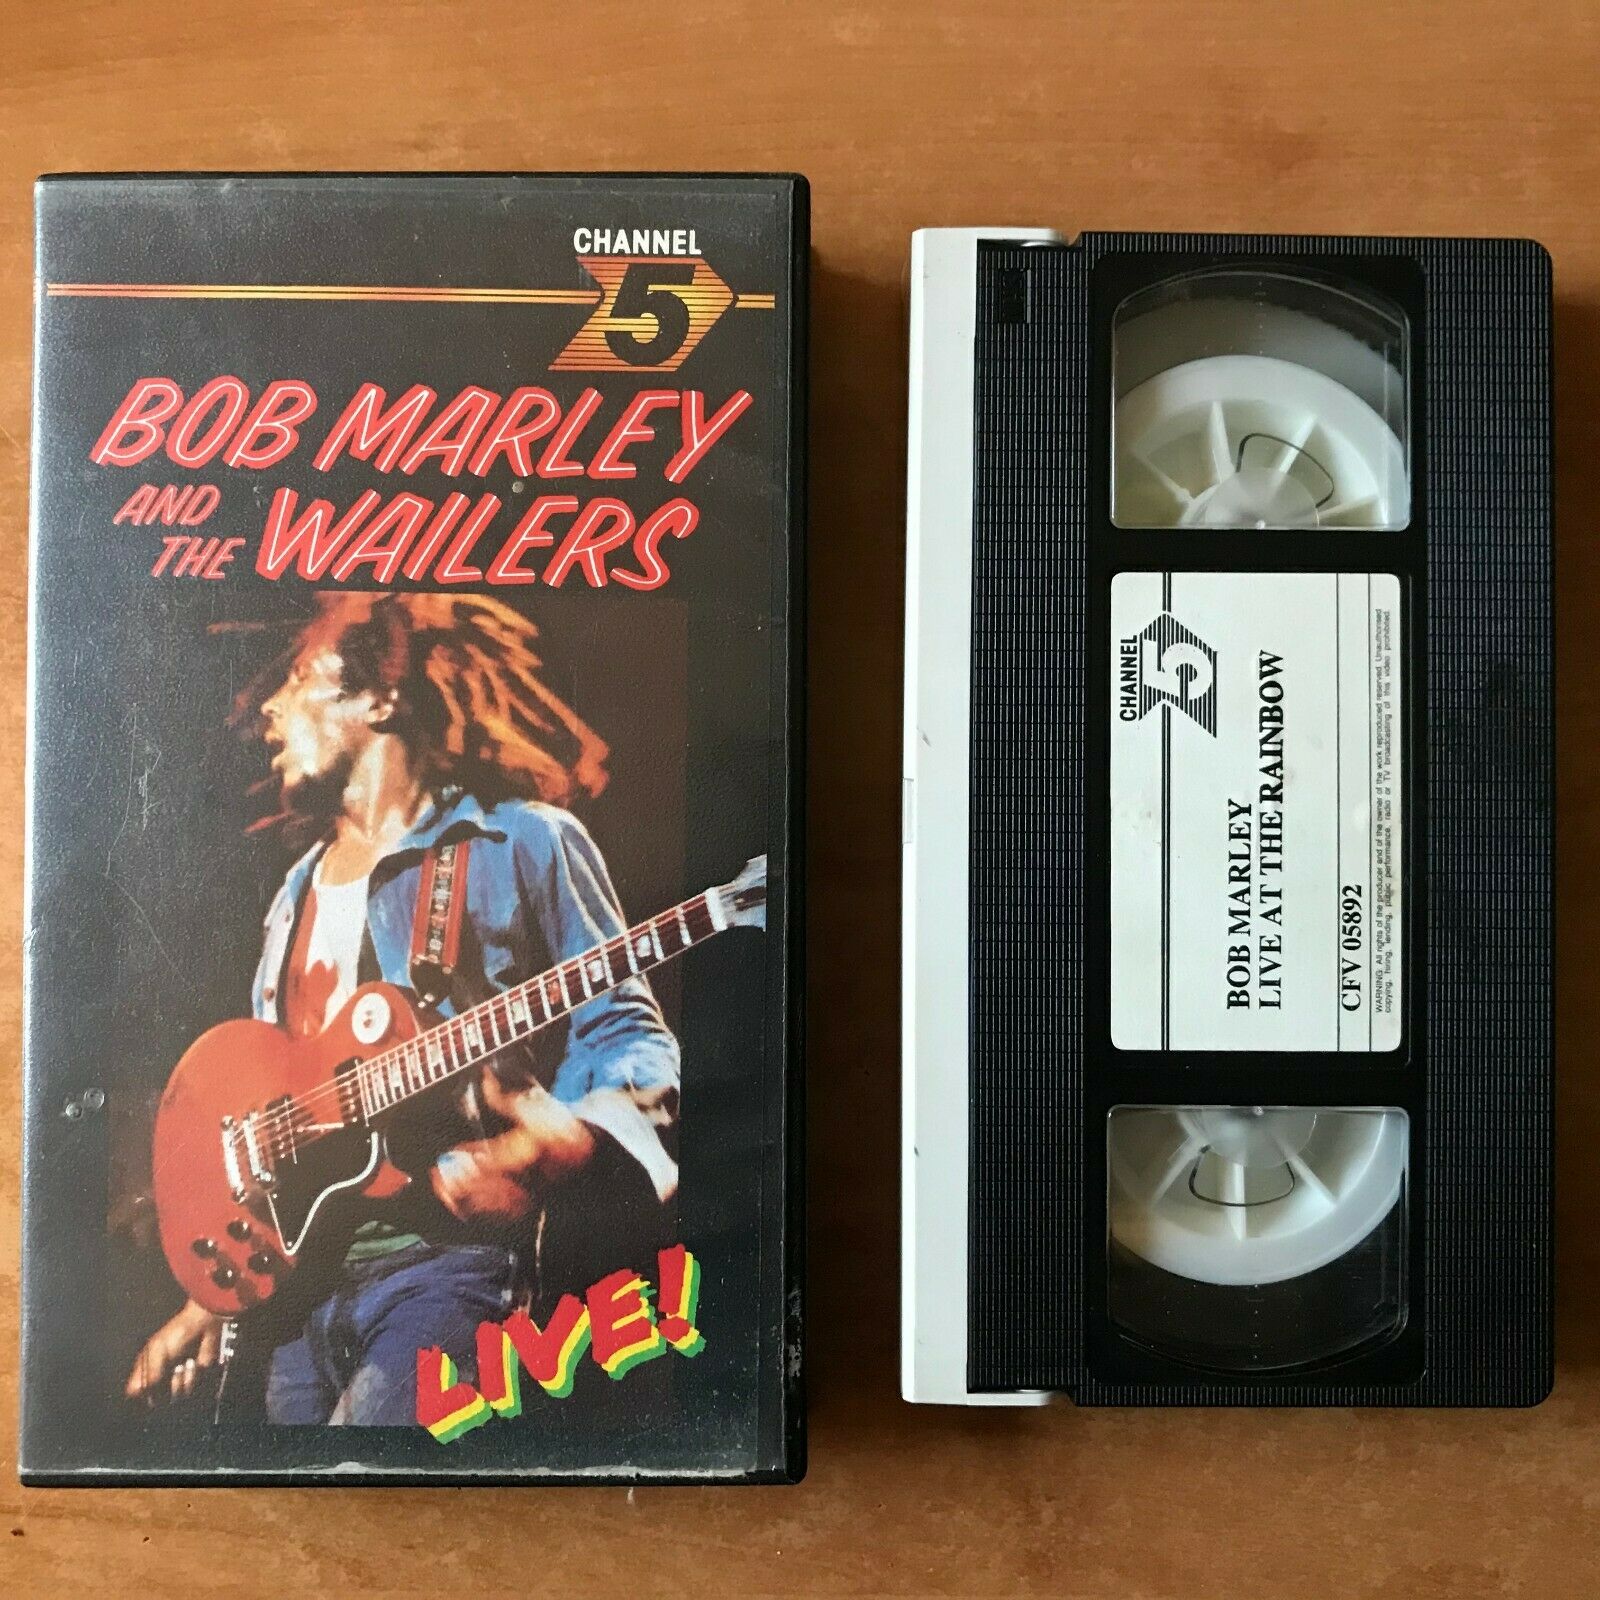 Bob Marley And The Wailers: Live At The Rainbow [London] "Exodus" - Music - VHS-